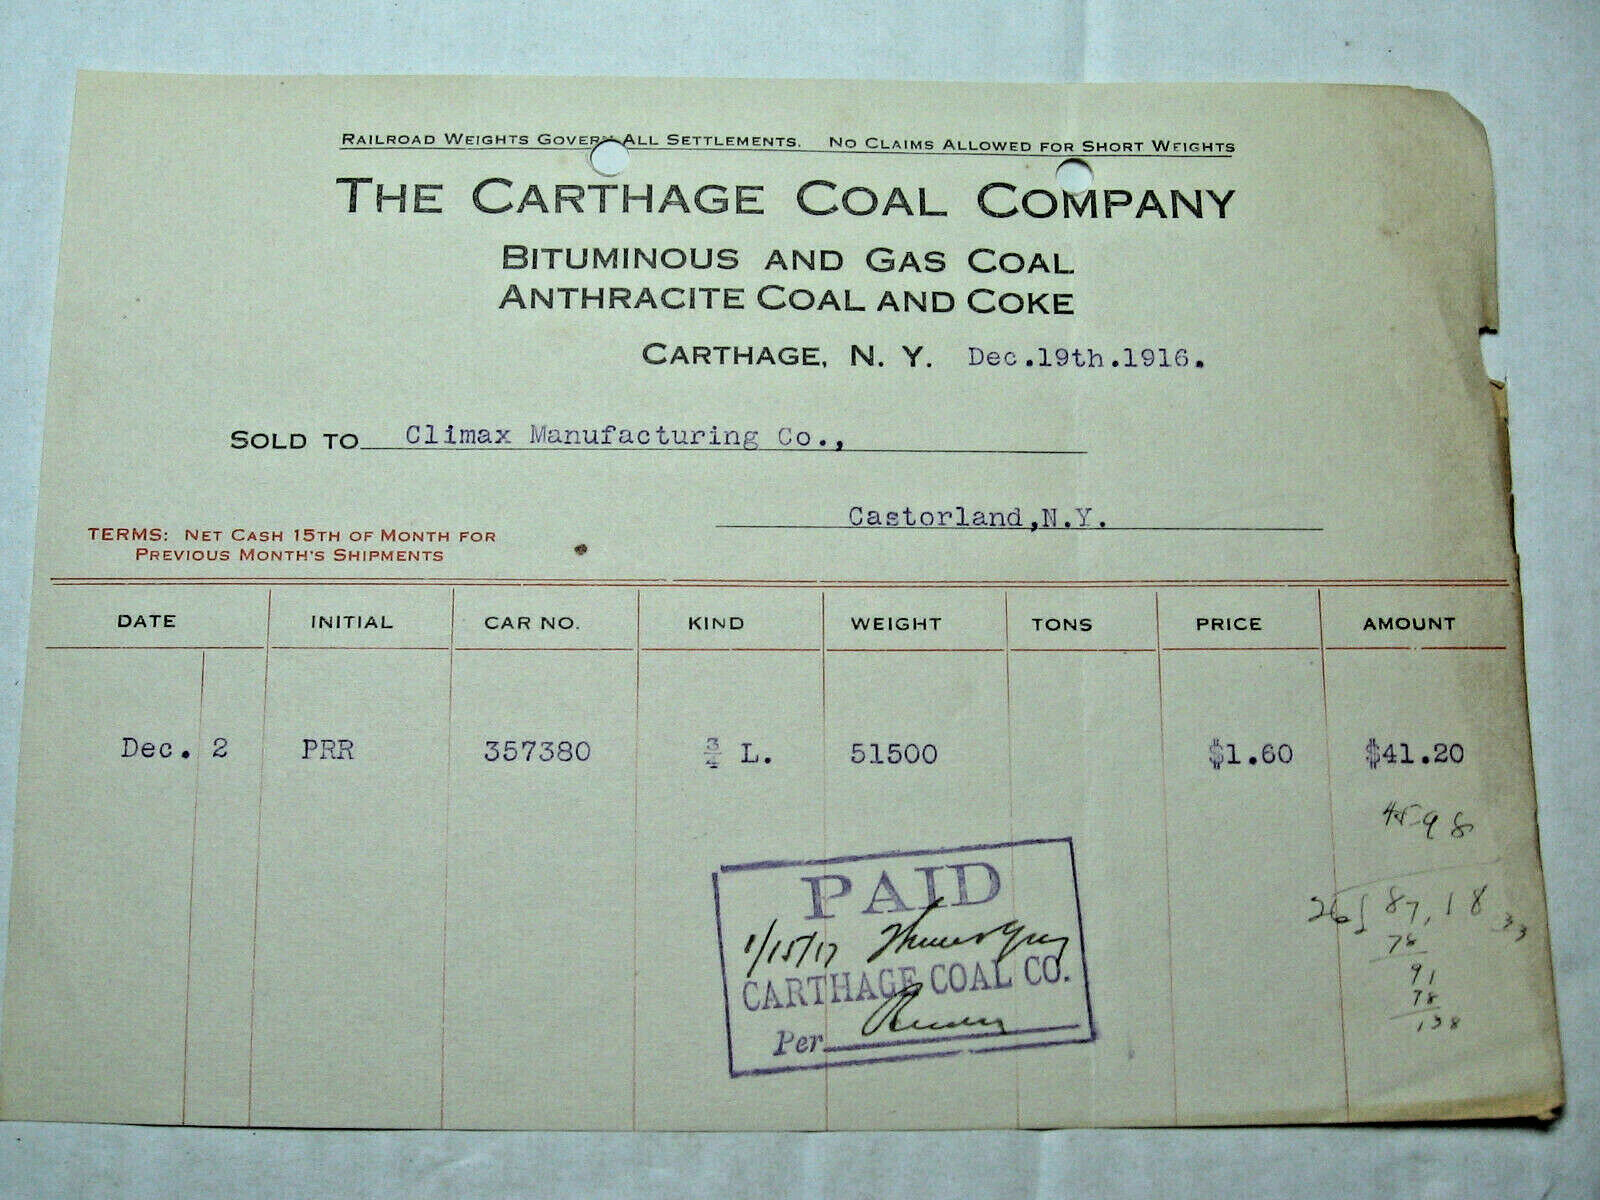 12-19-1916 Carthage Coal Co. Invoice Sent To Company In Castorland, N.y.